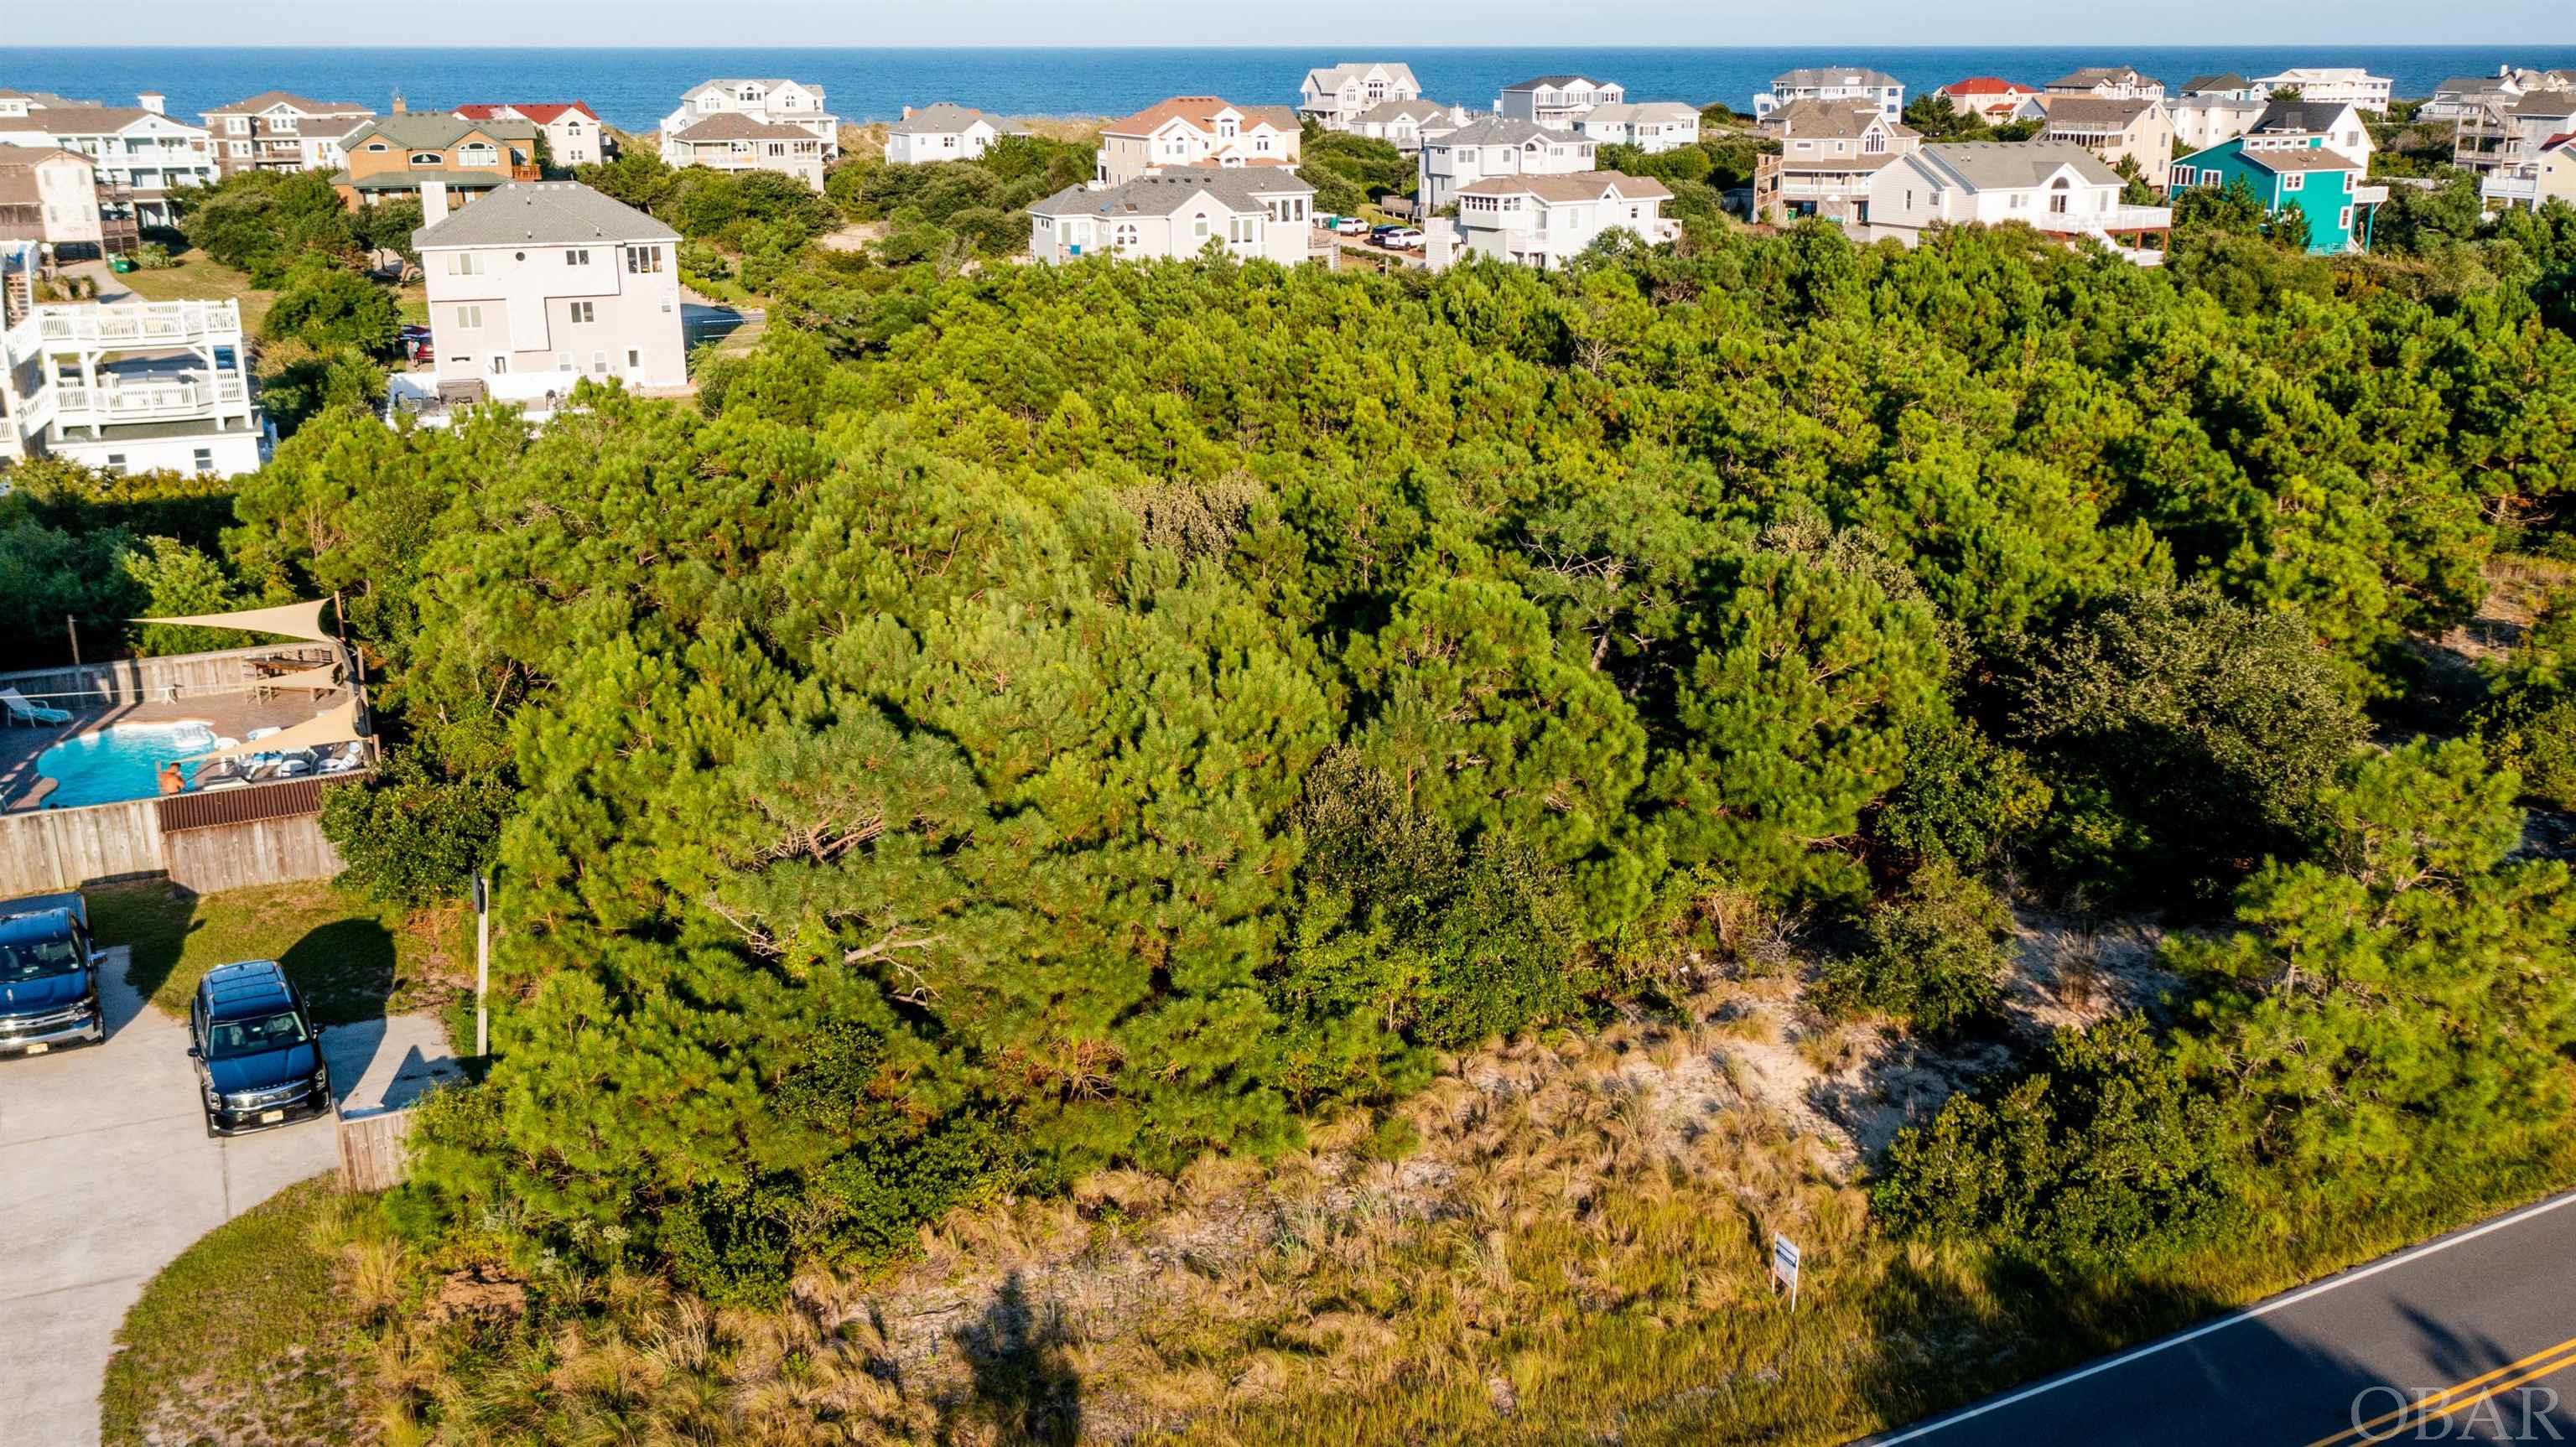 5th row lot in Whalehead, should have good ocean views, located in the quieter north end of Whalehead, Large homesite will accommodate a large rental machine type home, easy beach access.